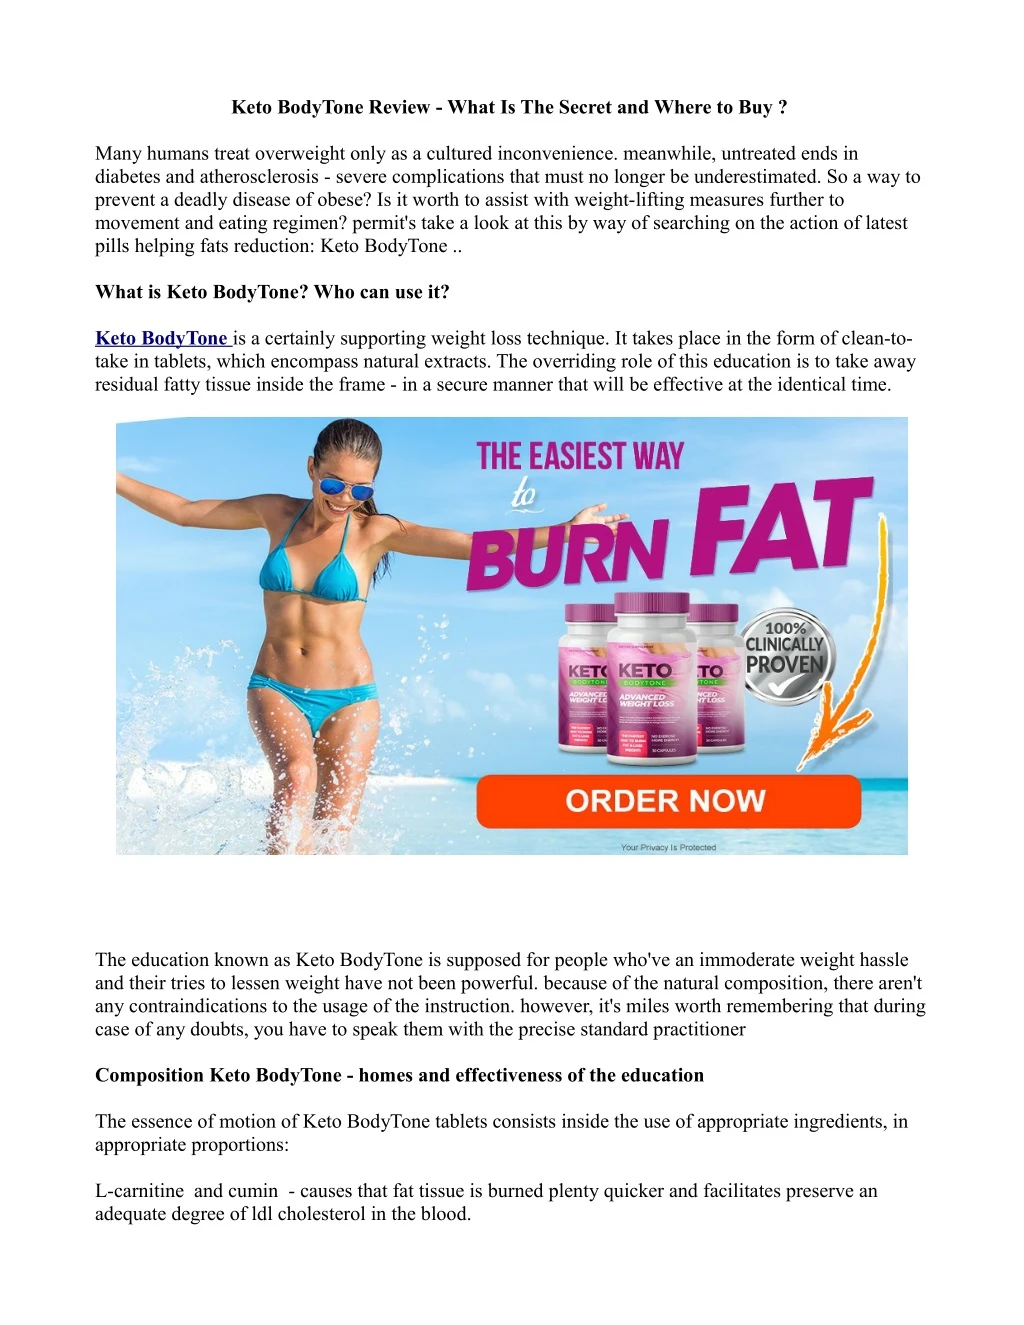 keto bodytone review what is the secret and where